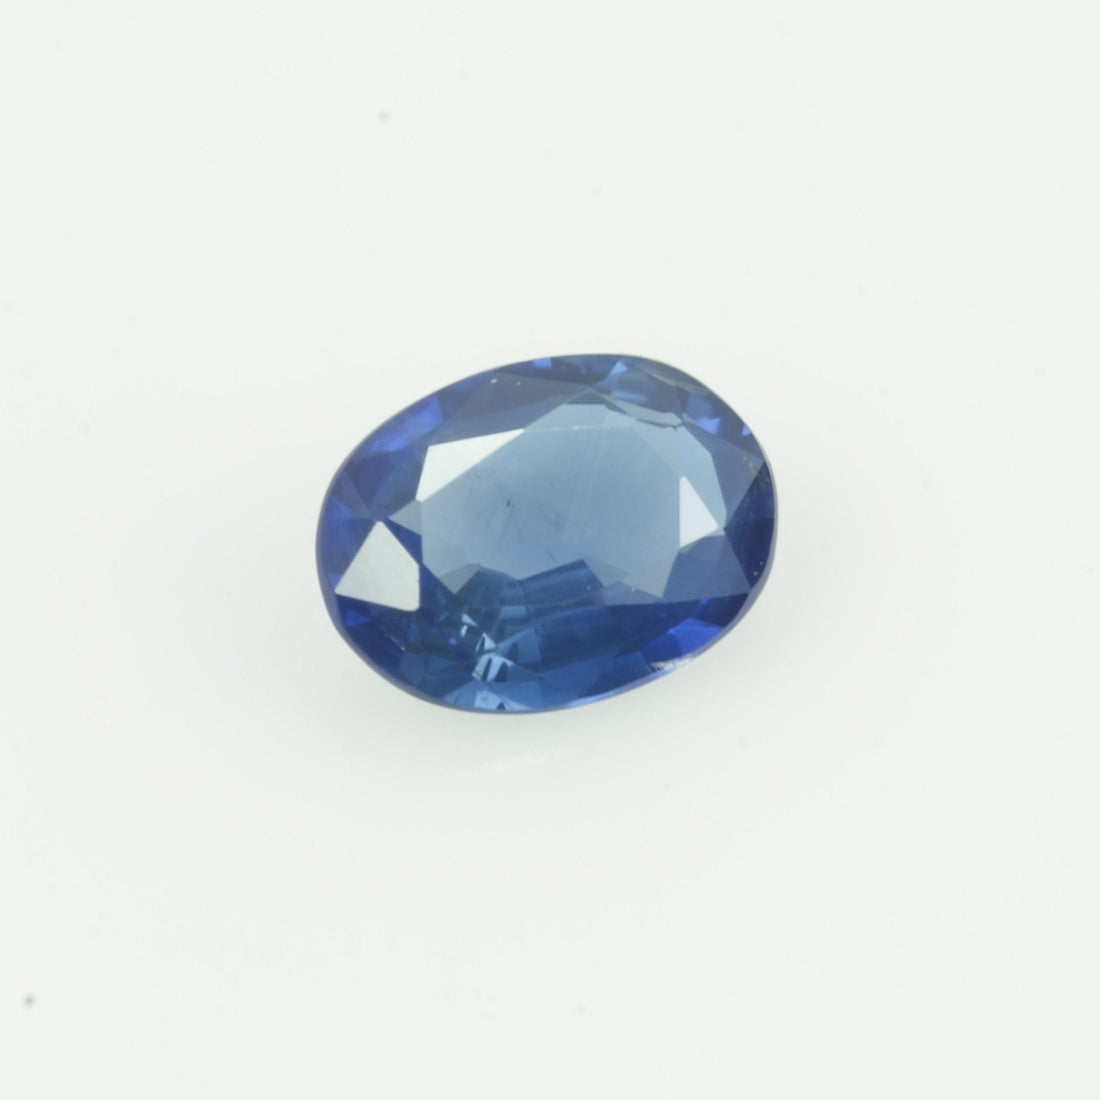 0.51 cts Natural Blue Sapphire Loose Gemstone Oval Cut